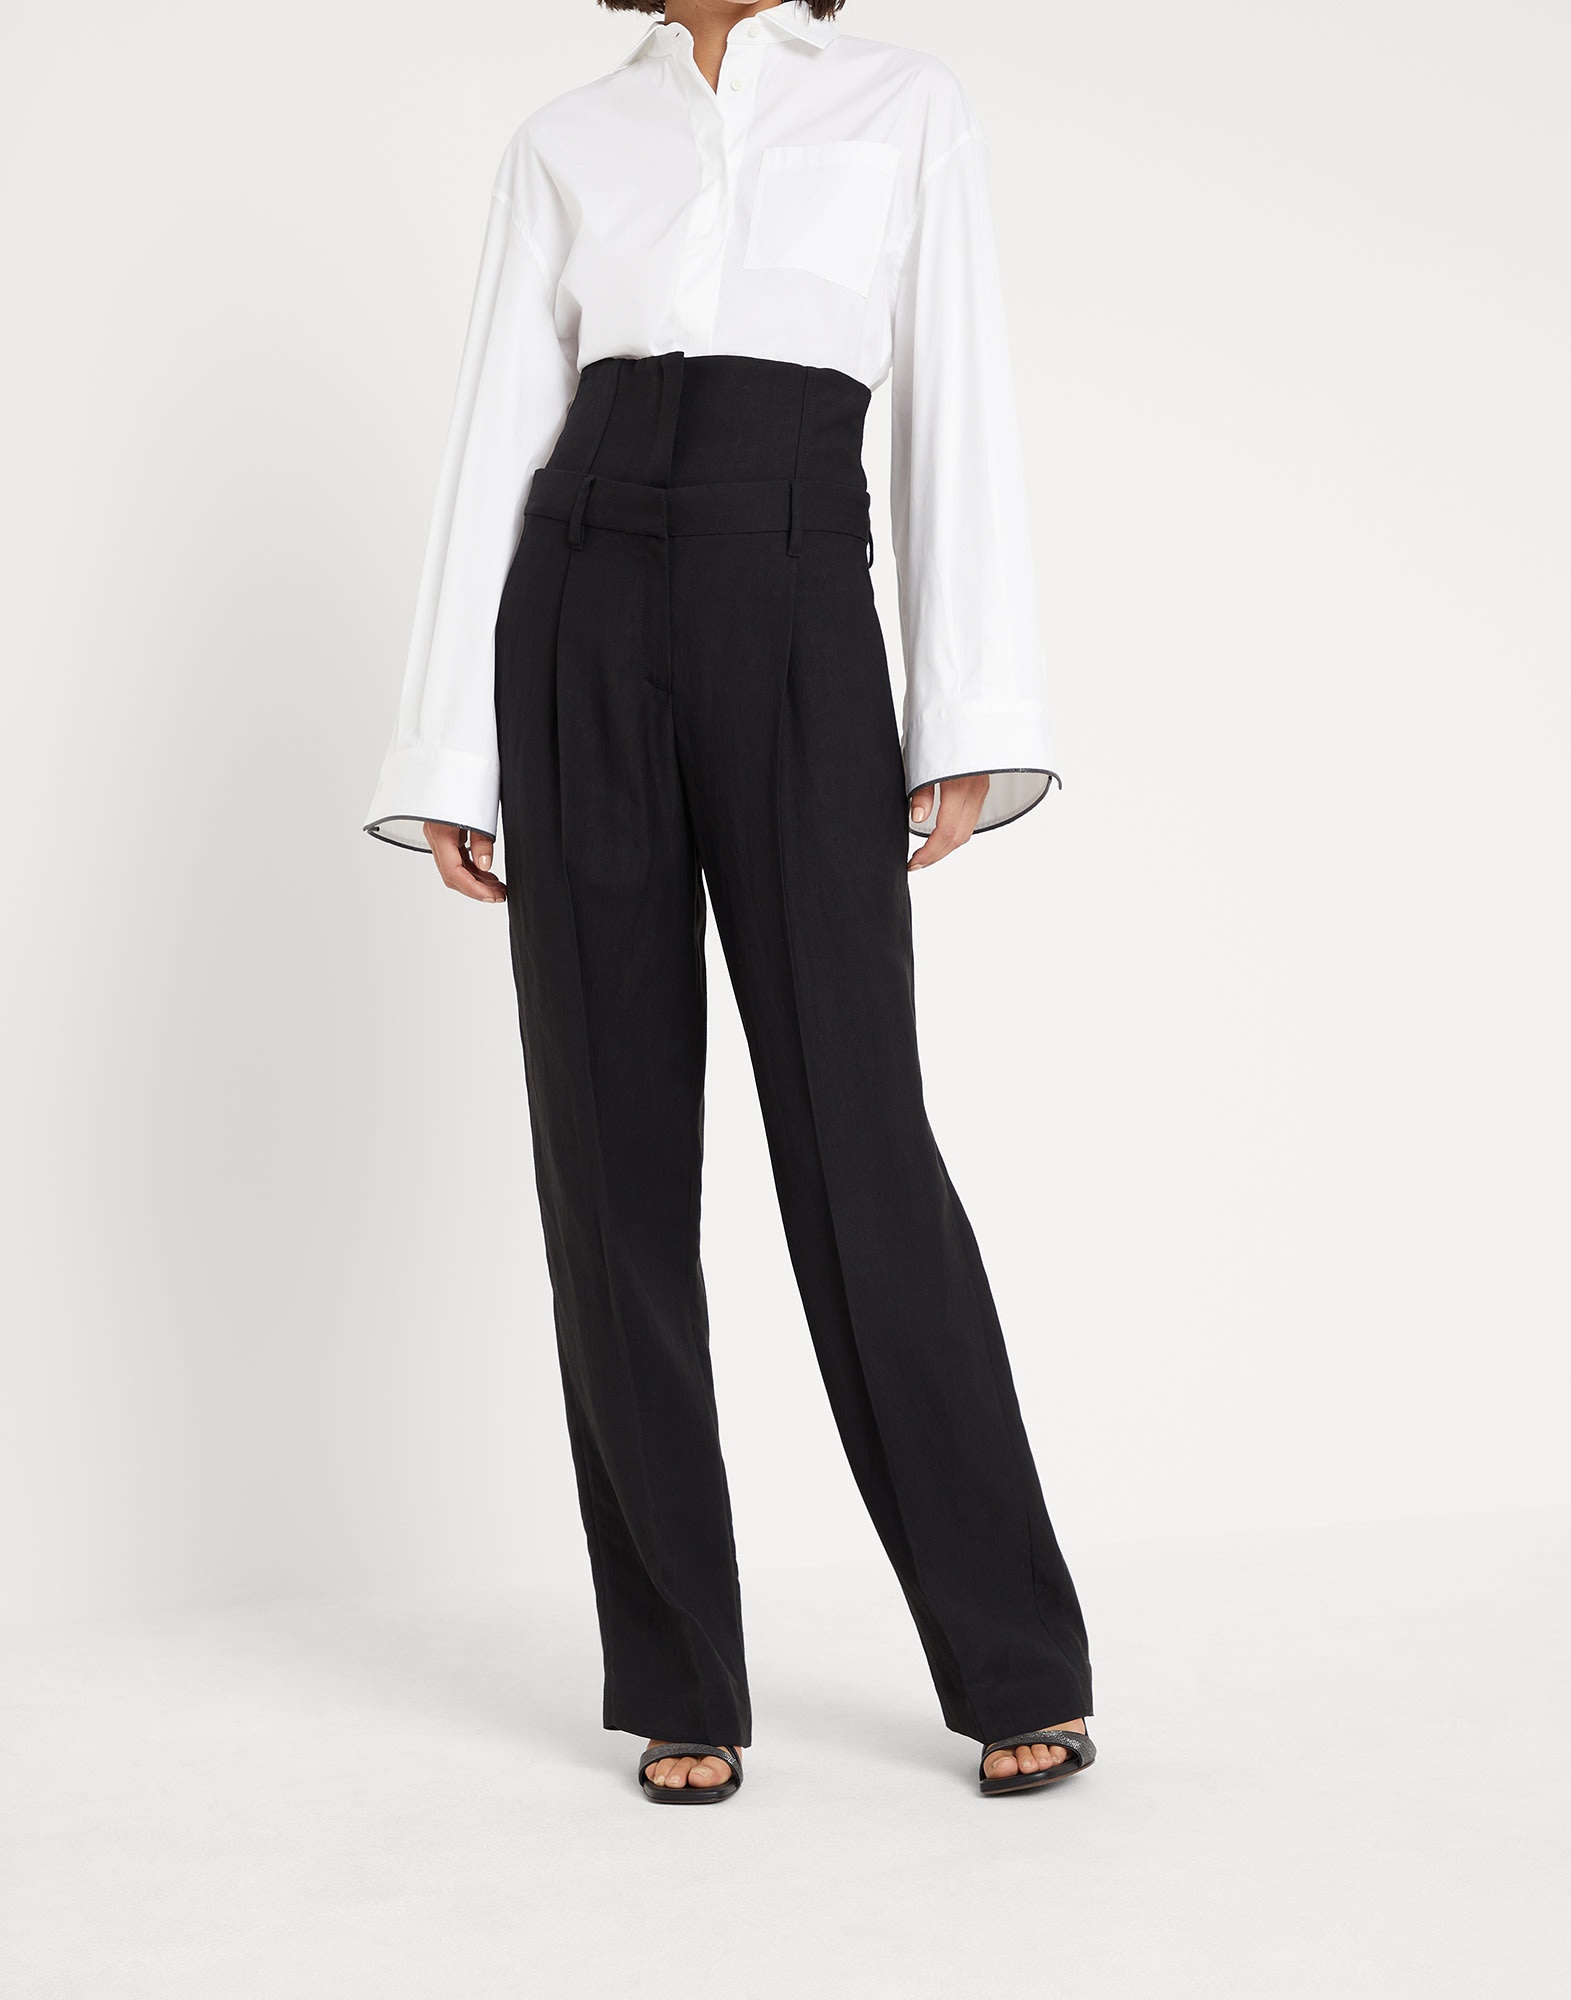 Viscose and linen fluid twill loose straight trousers with removable corset waistband and monili - 1